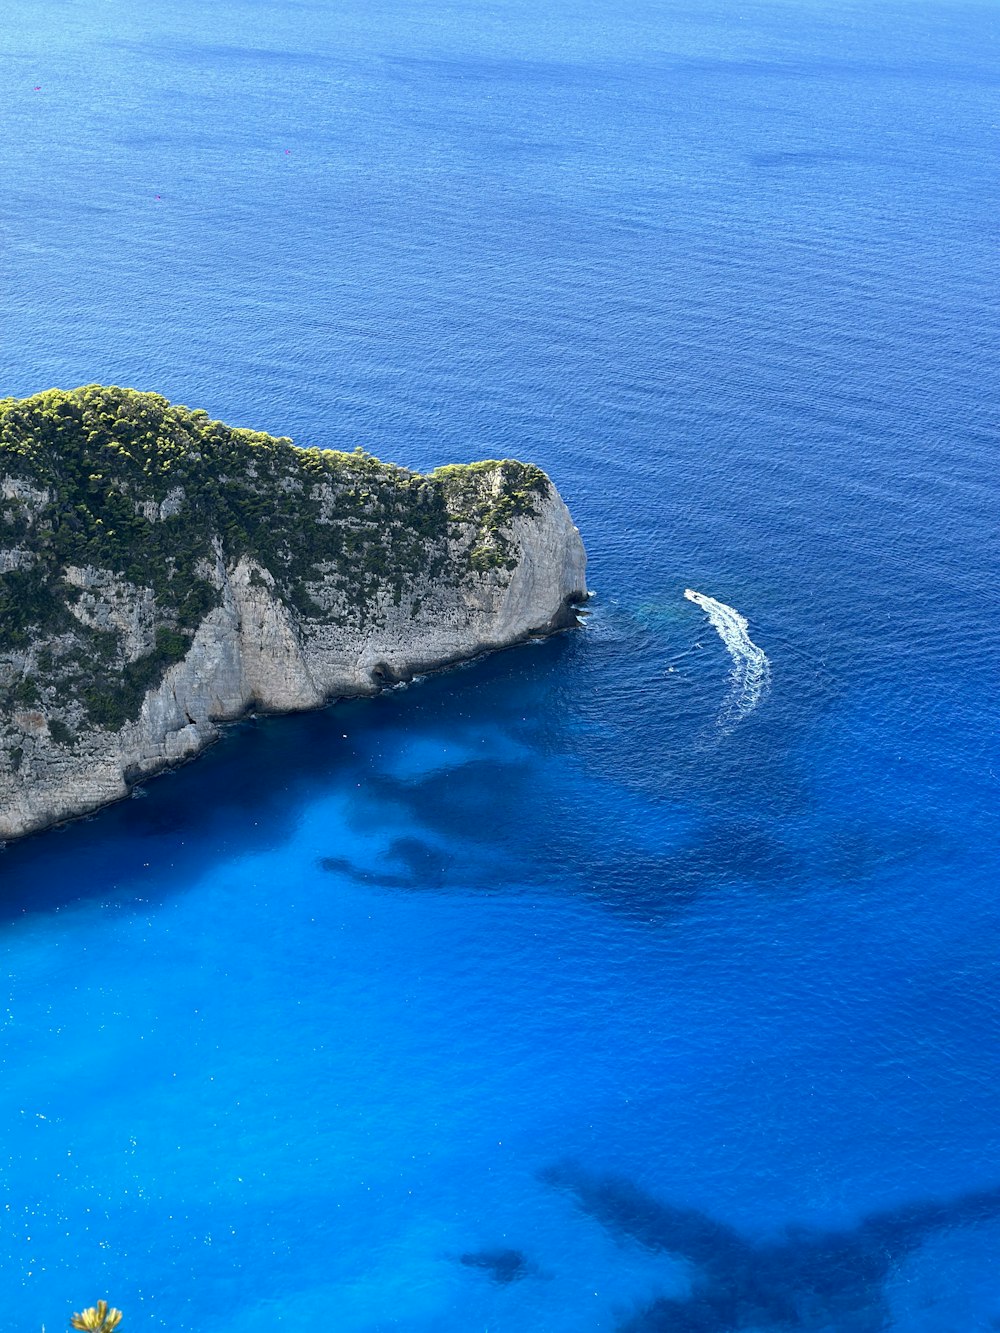 a boat is in the blue water near a cliff